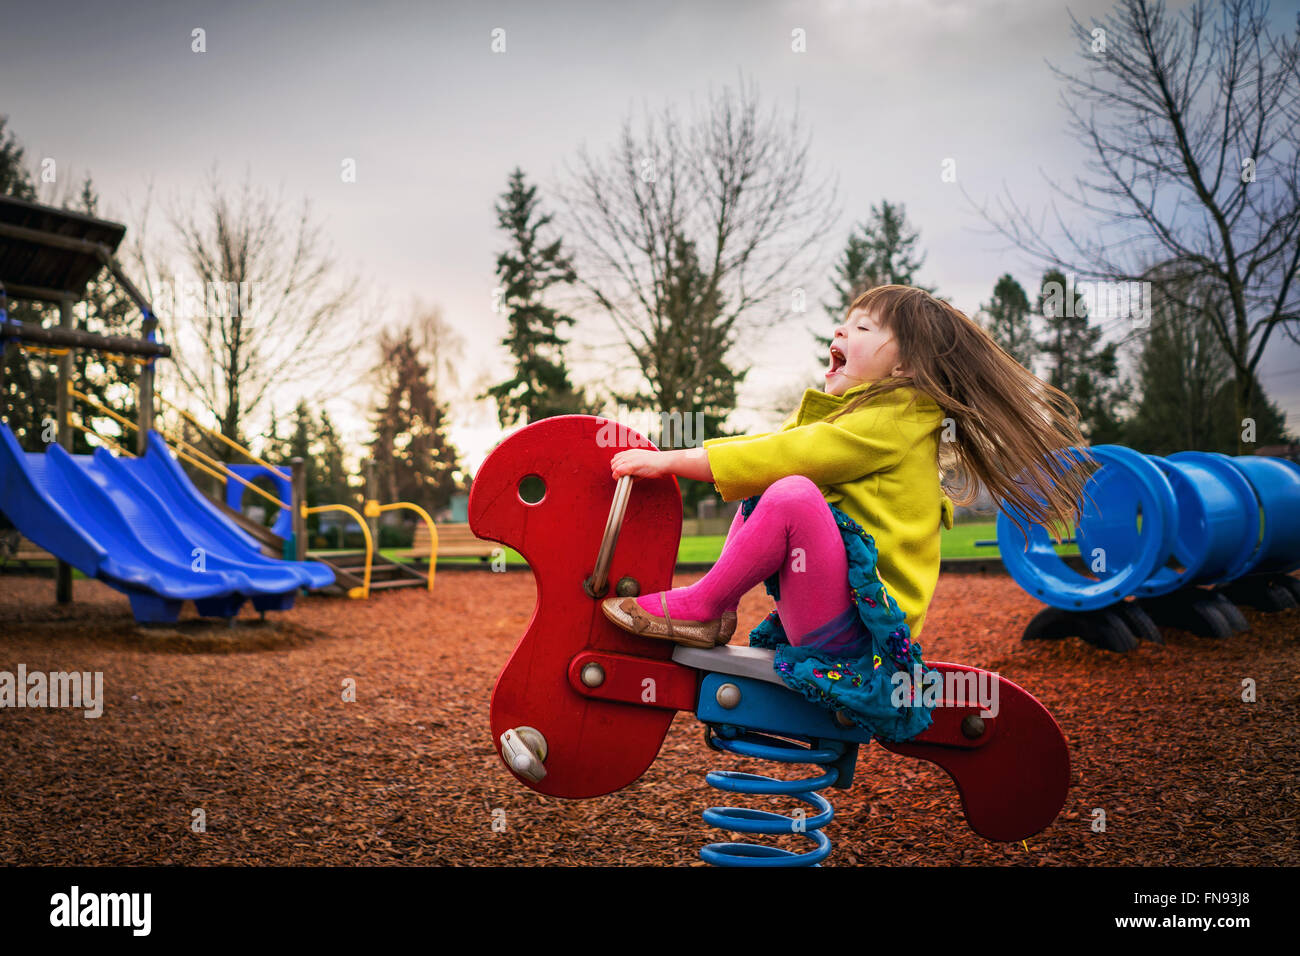 Girl sitting on spring ride in playground Banque D'Images